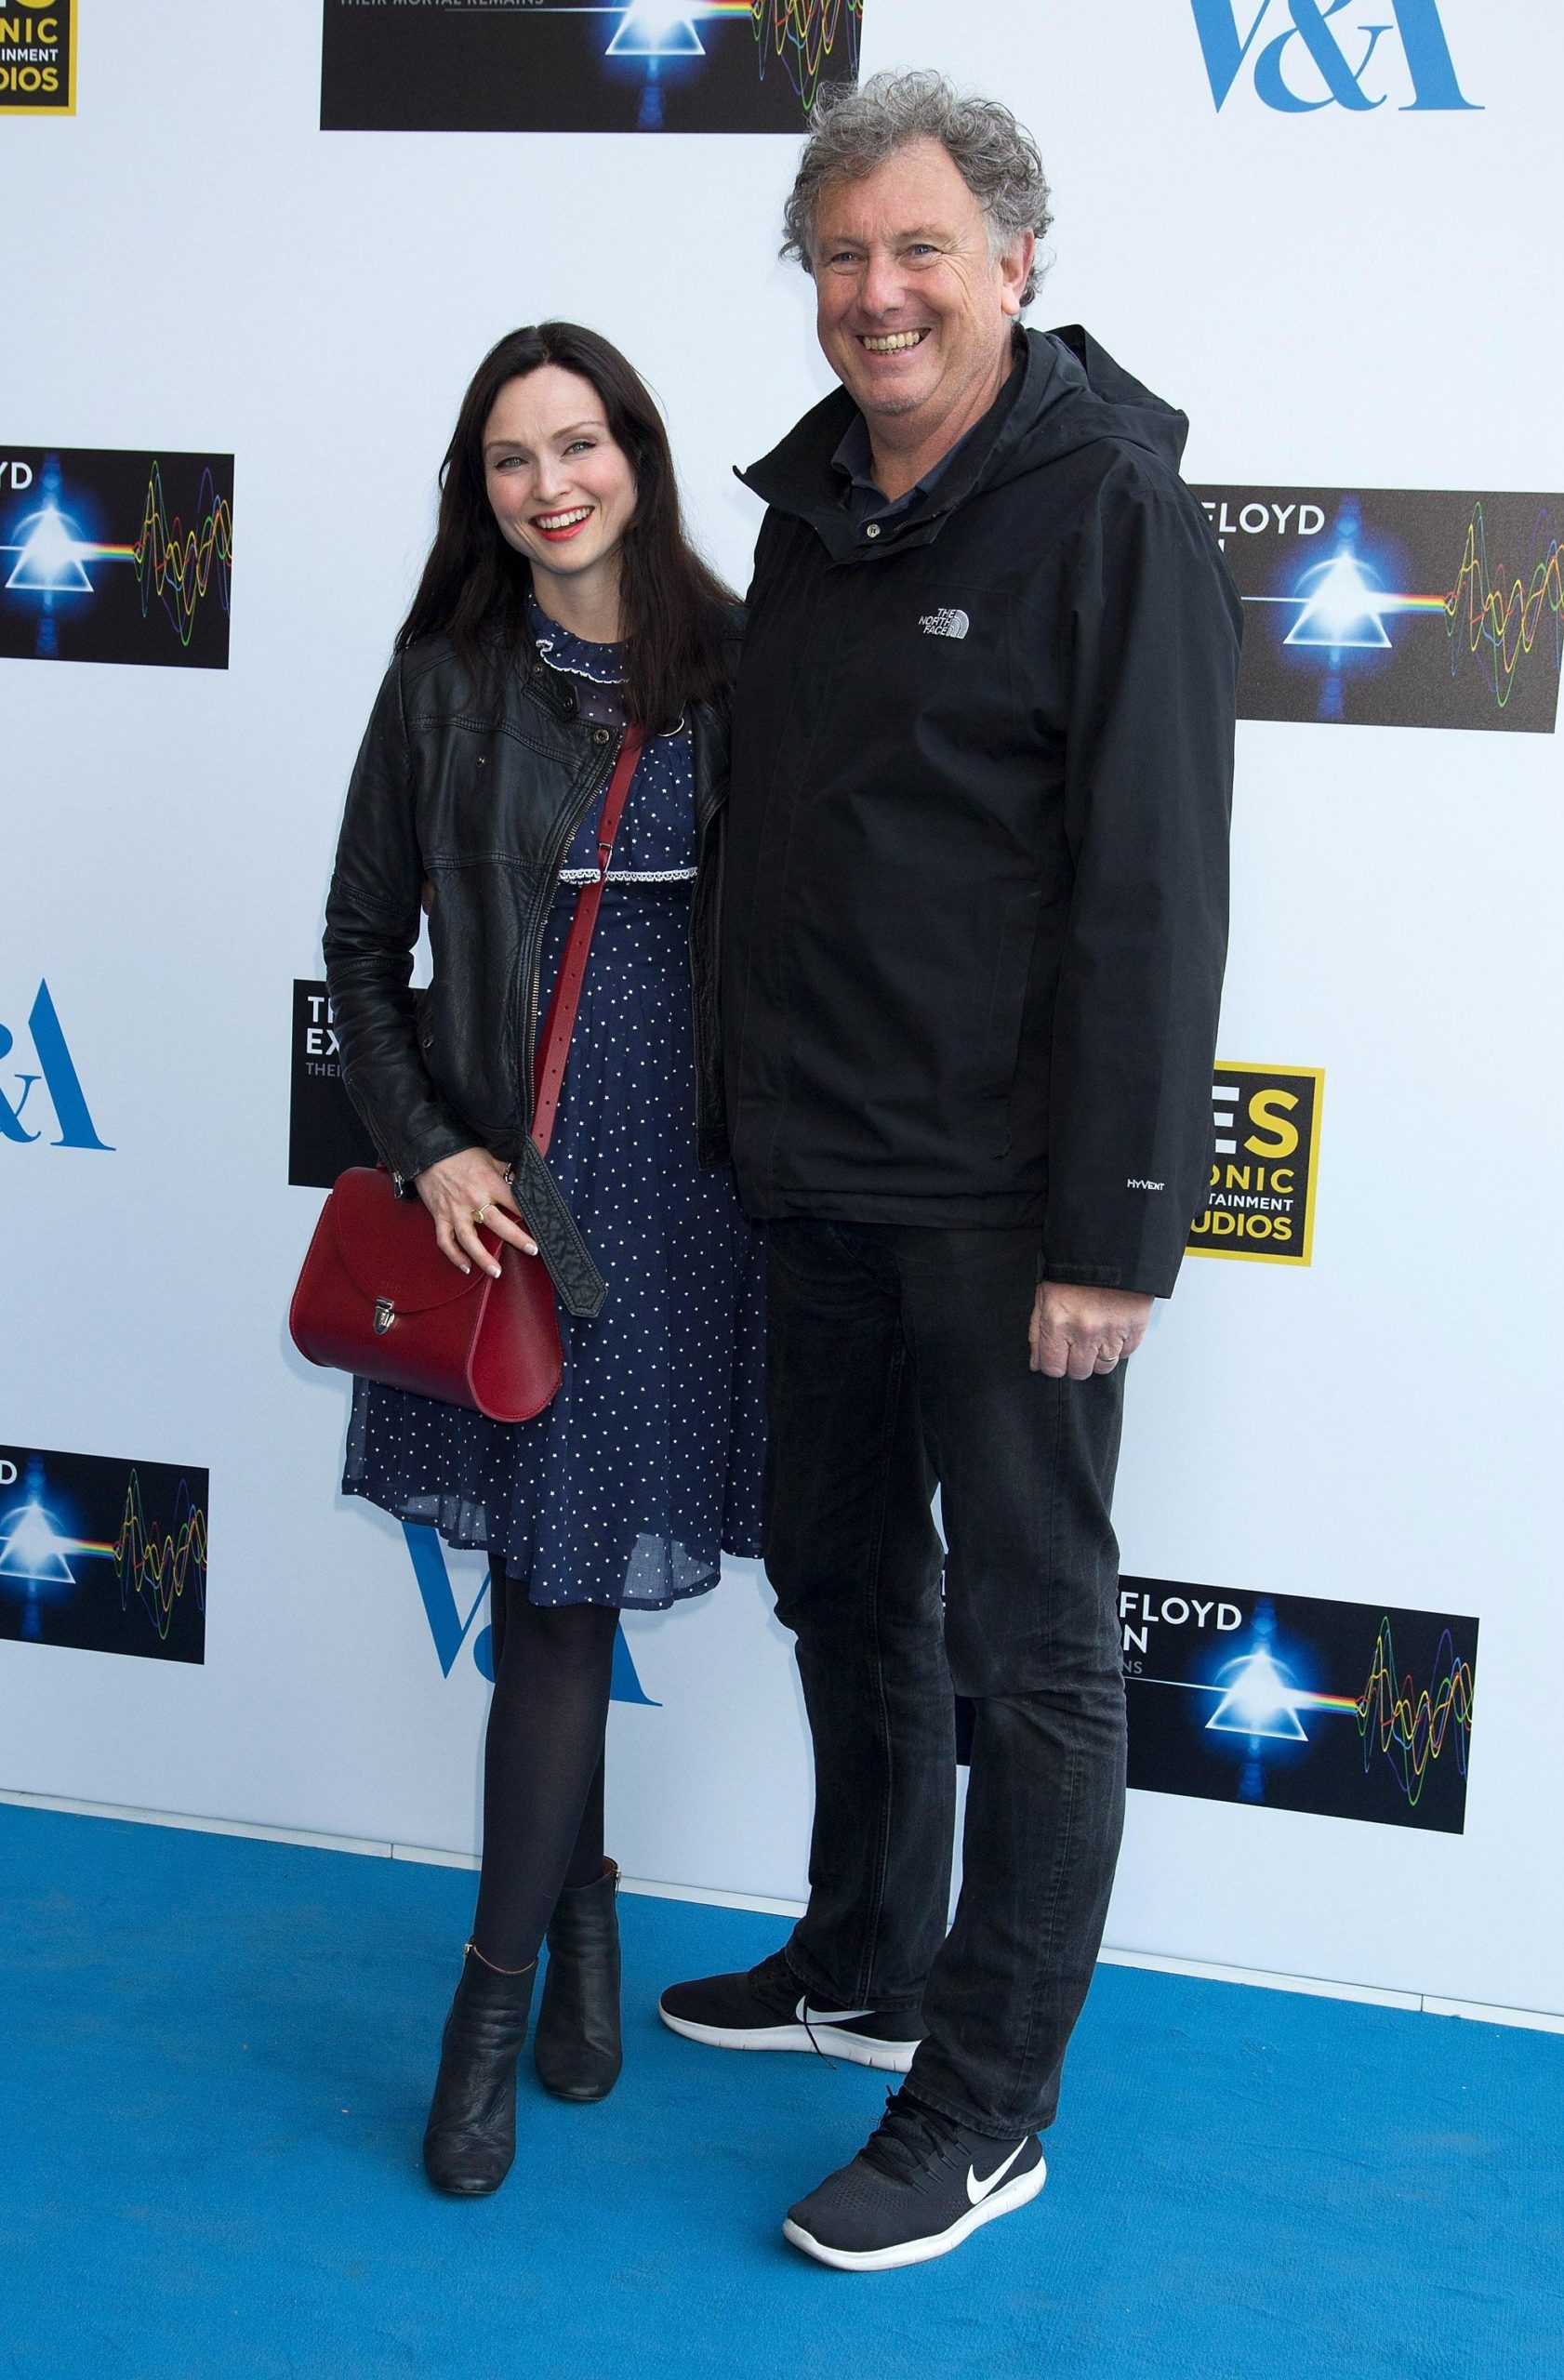 Sophie Ellis Bextor with her father.